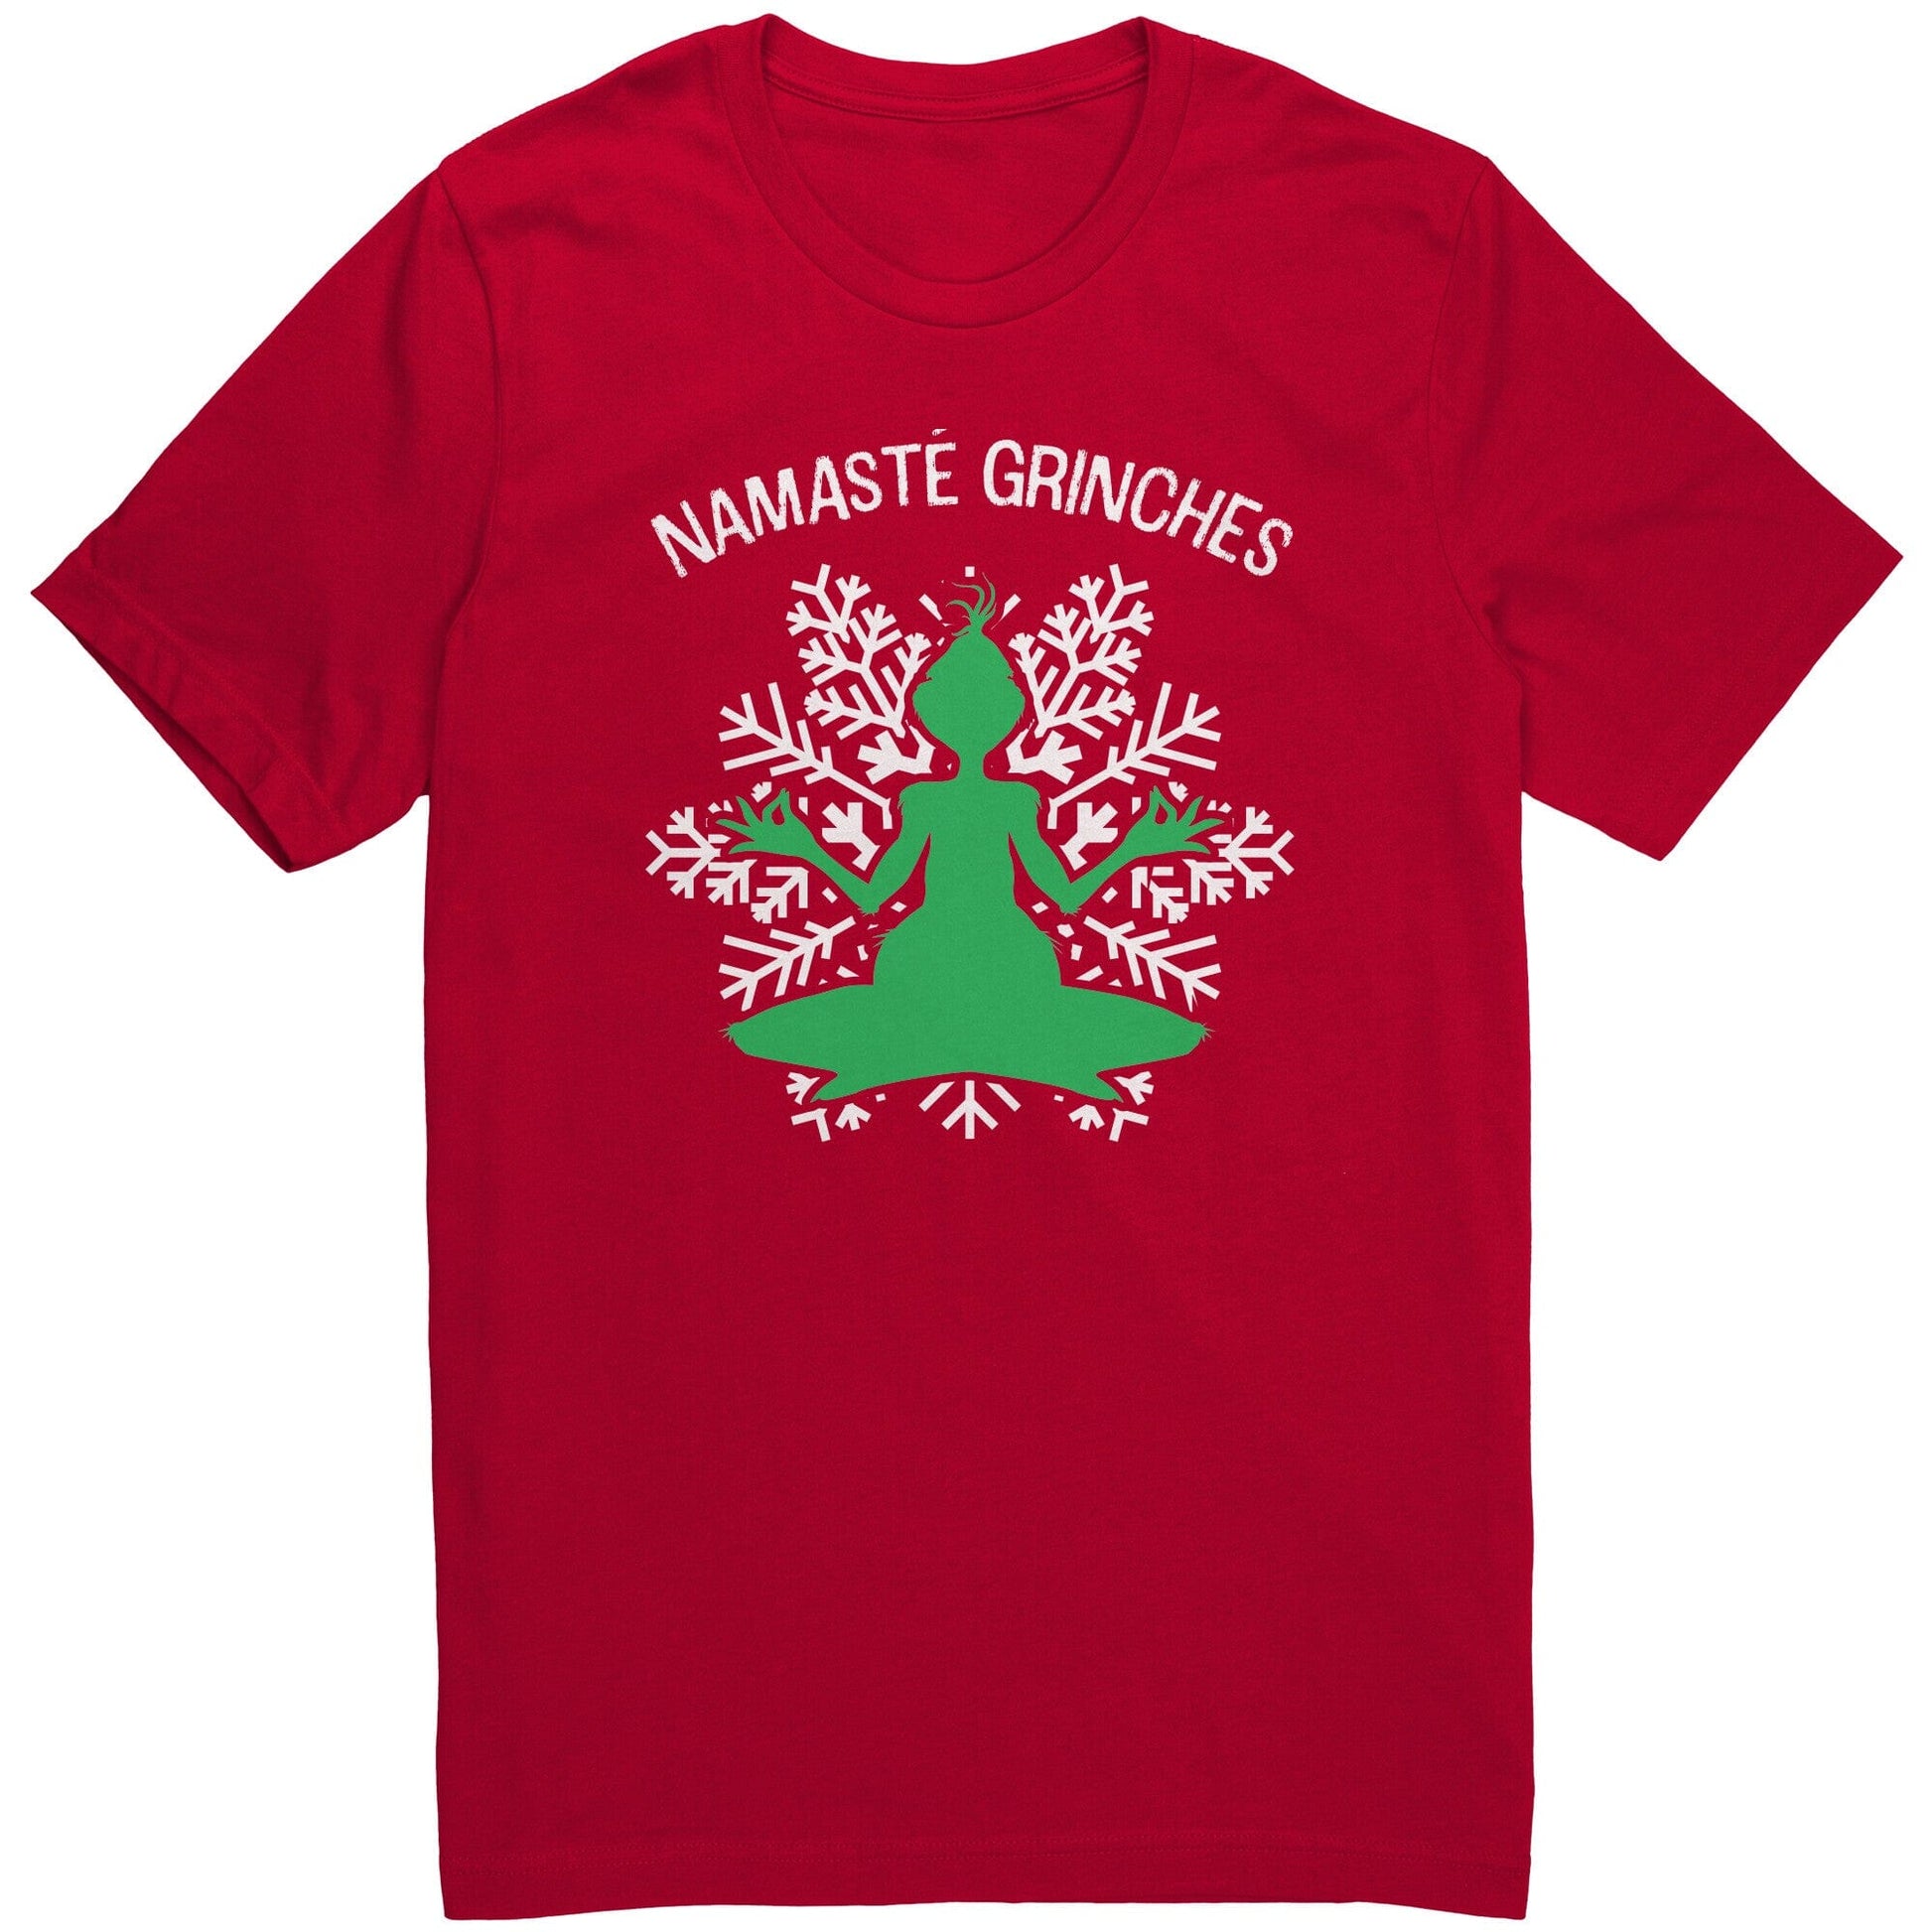 Namaste Grinches Unisex T-shirt Apparel teelaunch Red S 